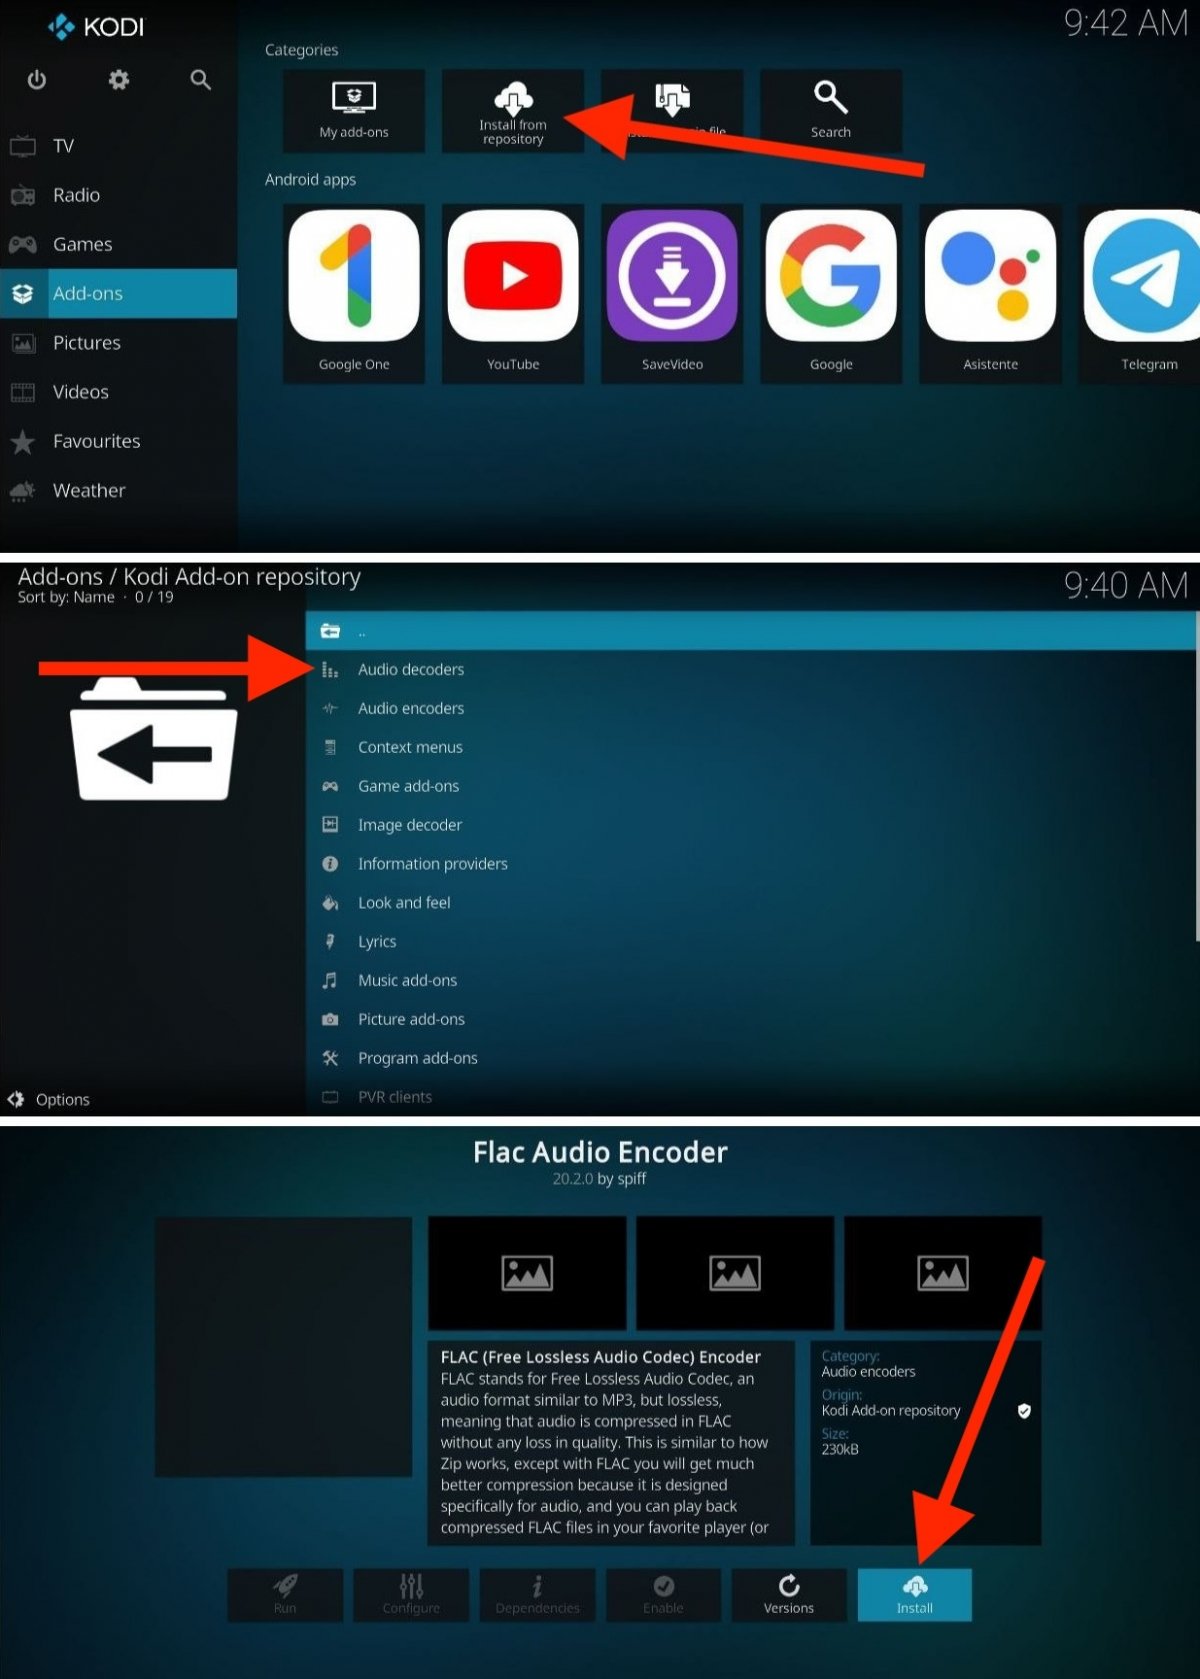 Installing add-ons from Kodi's official repo is very easy